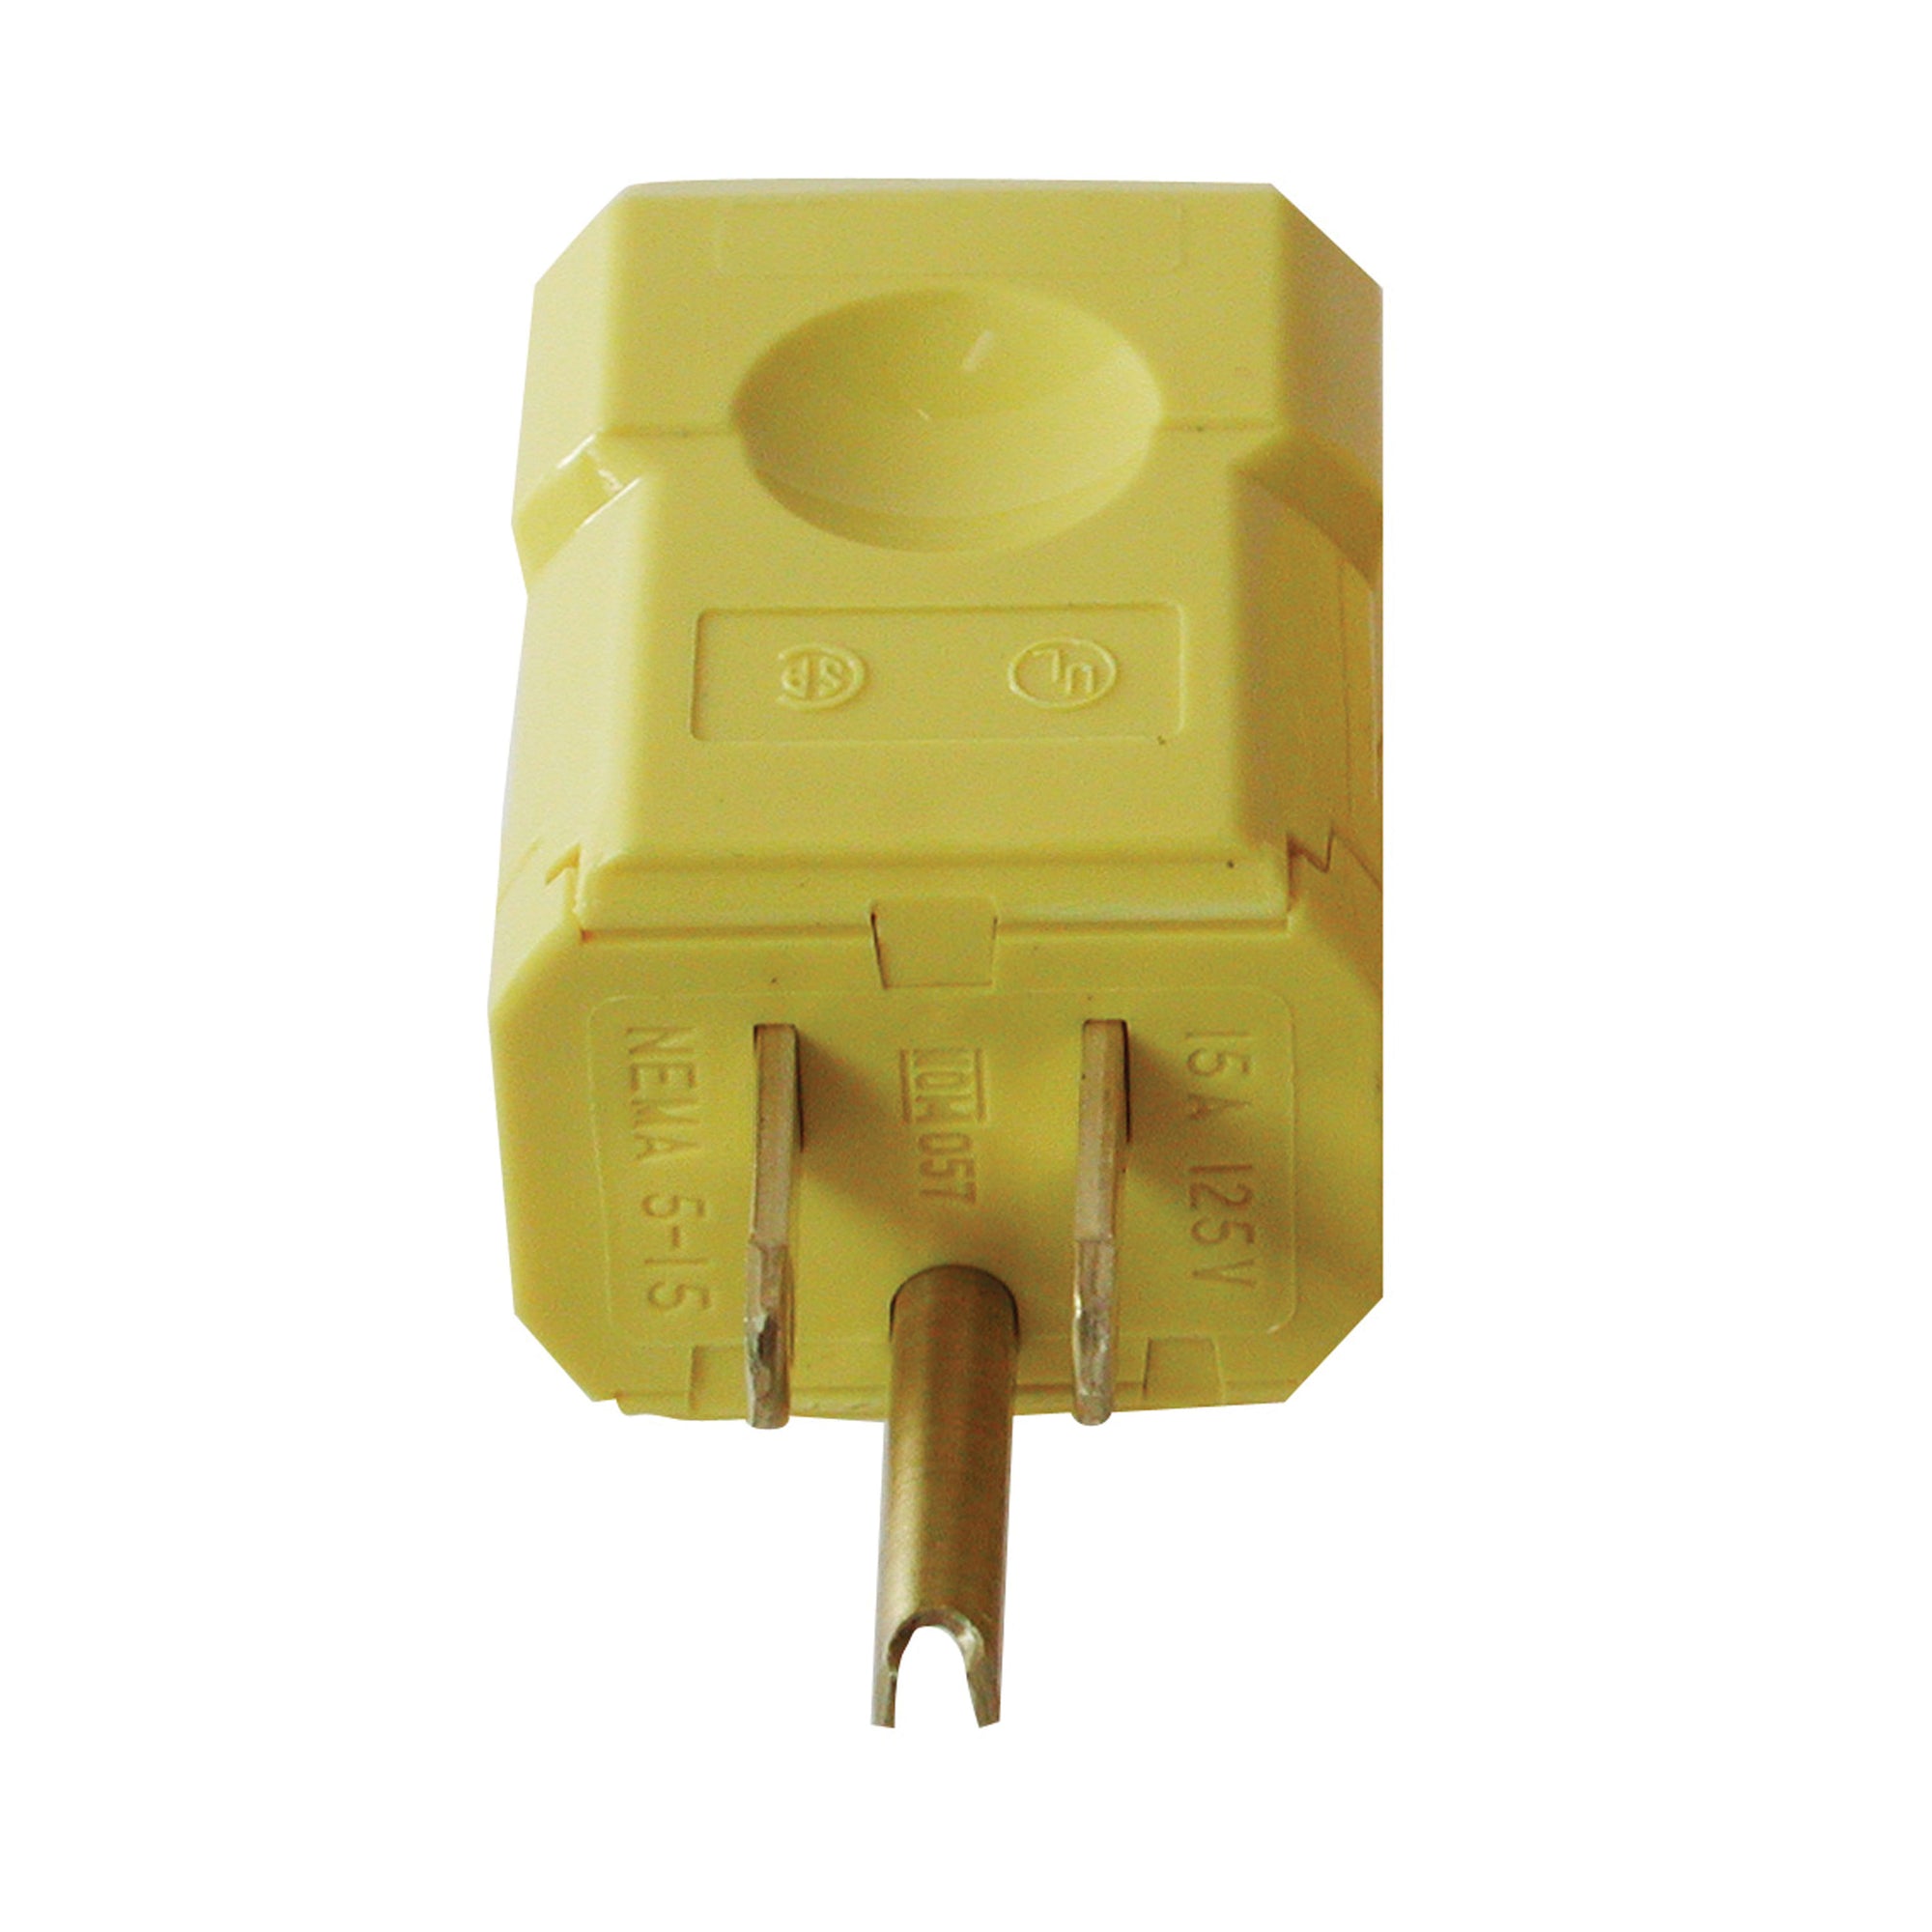 Diamond Group by Valterra DG532496VP Quick Plug Connector - 3-Wire, Male, Yellow